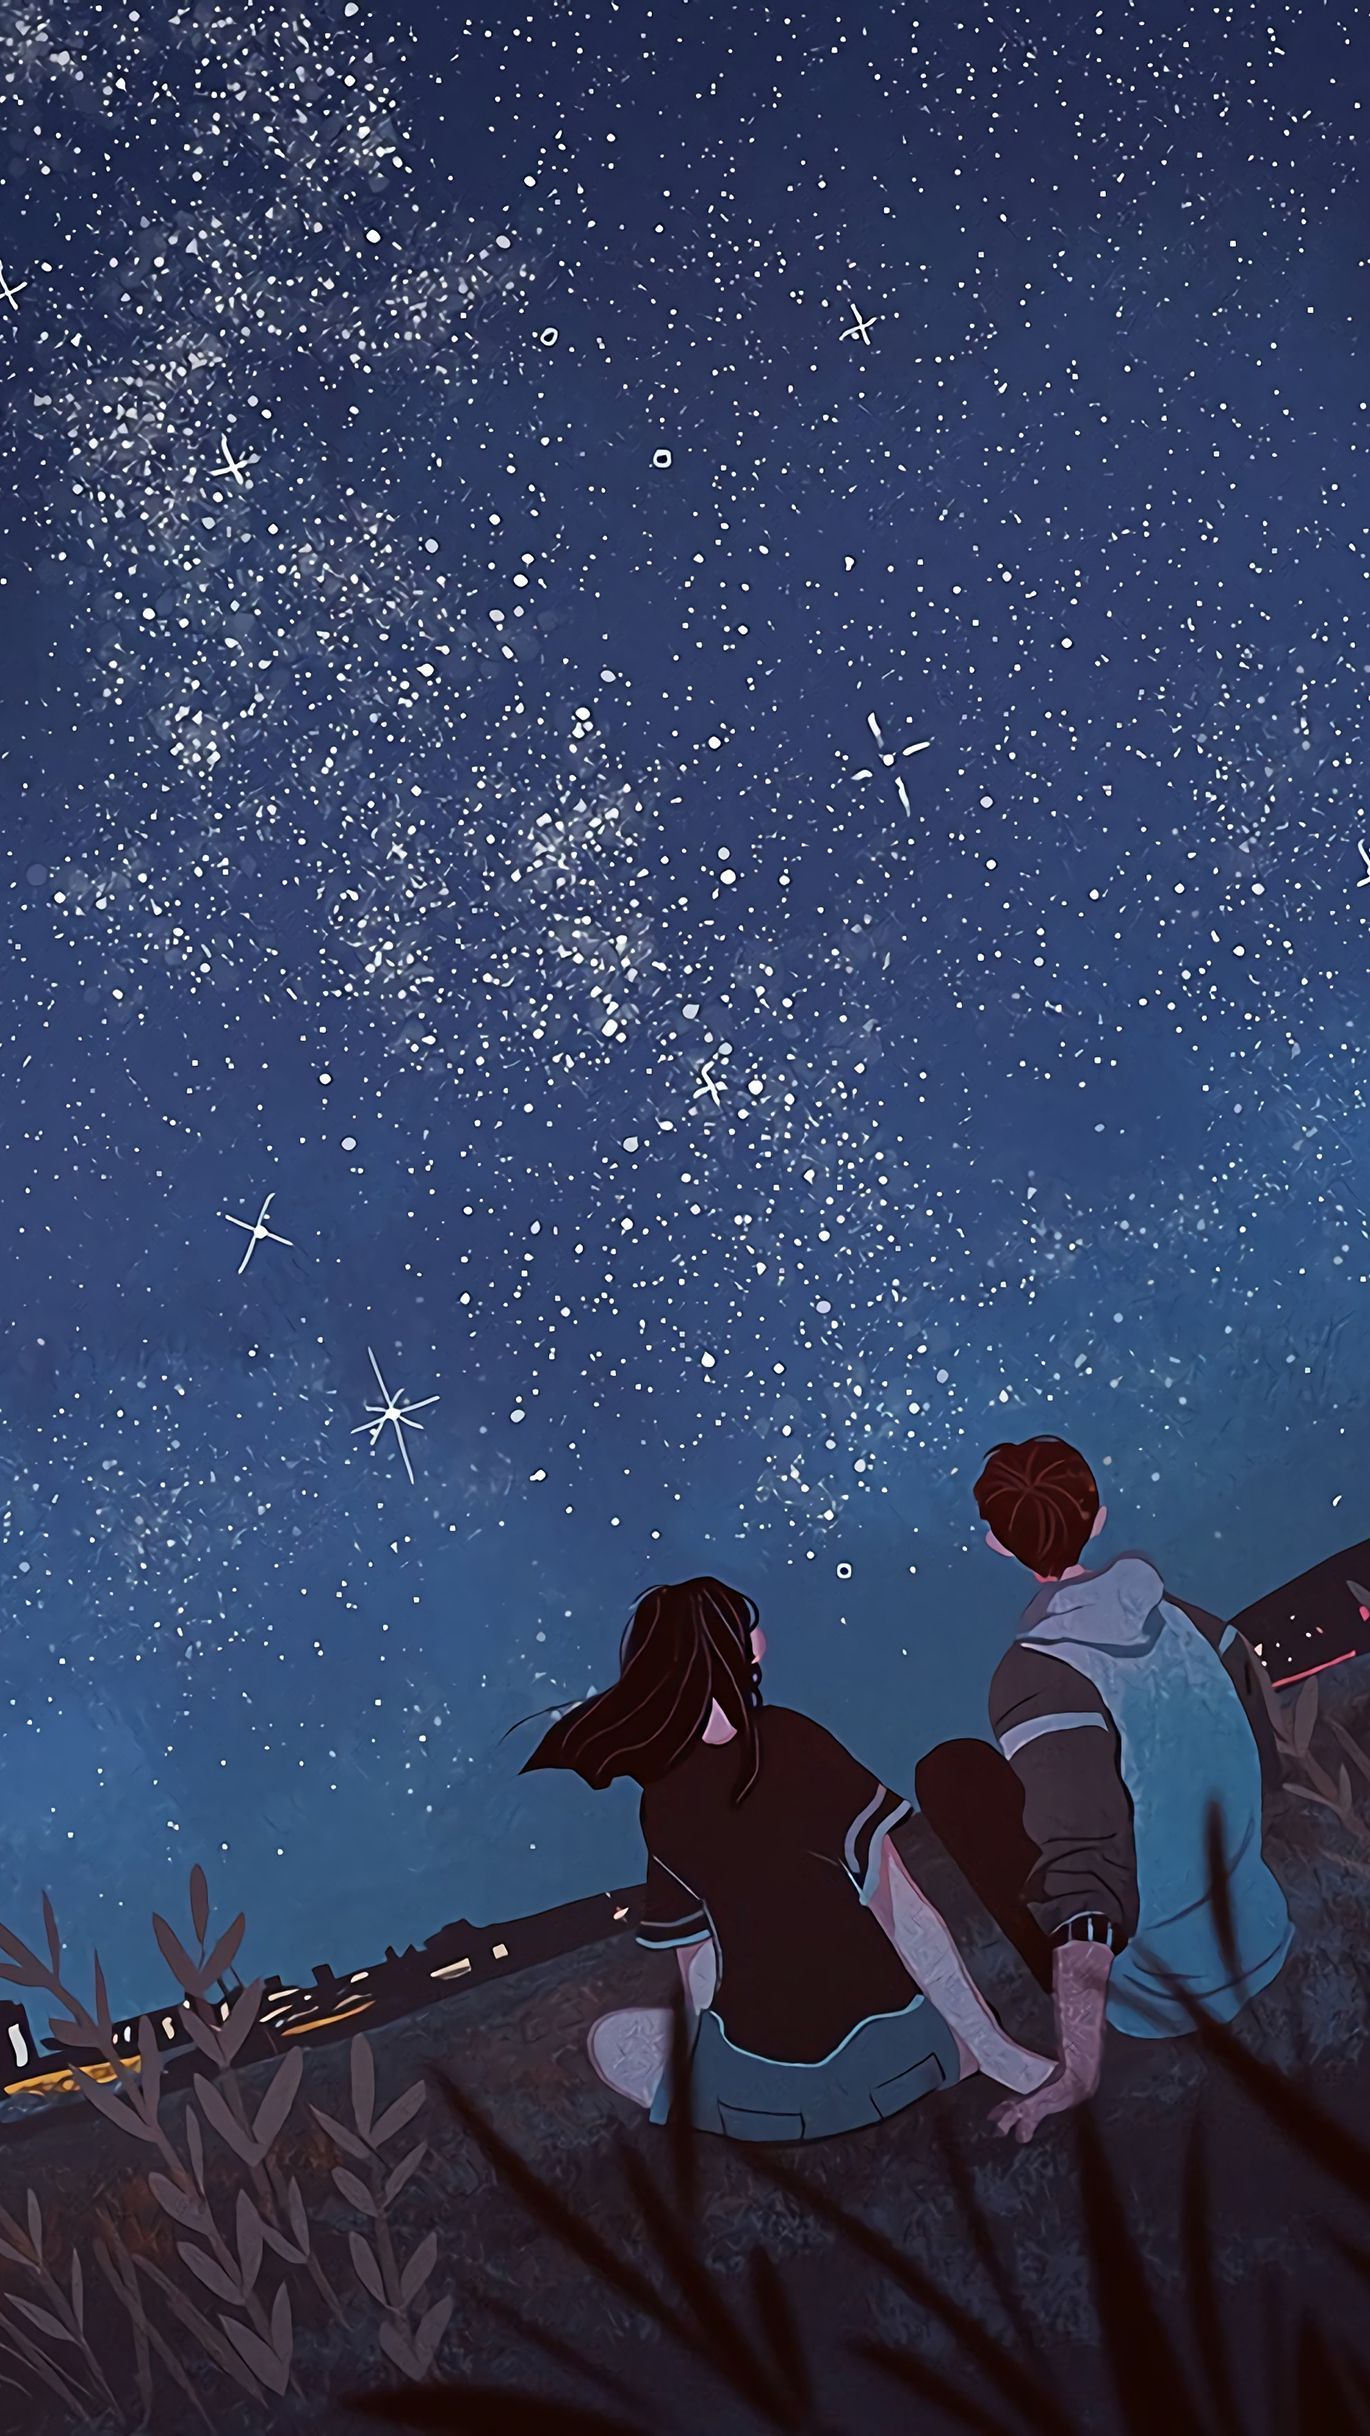 Shining star on the sky, girl and boy sitting in the grassland. Cute art, Aesthetic art, Cute couple art